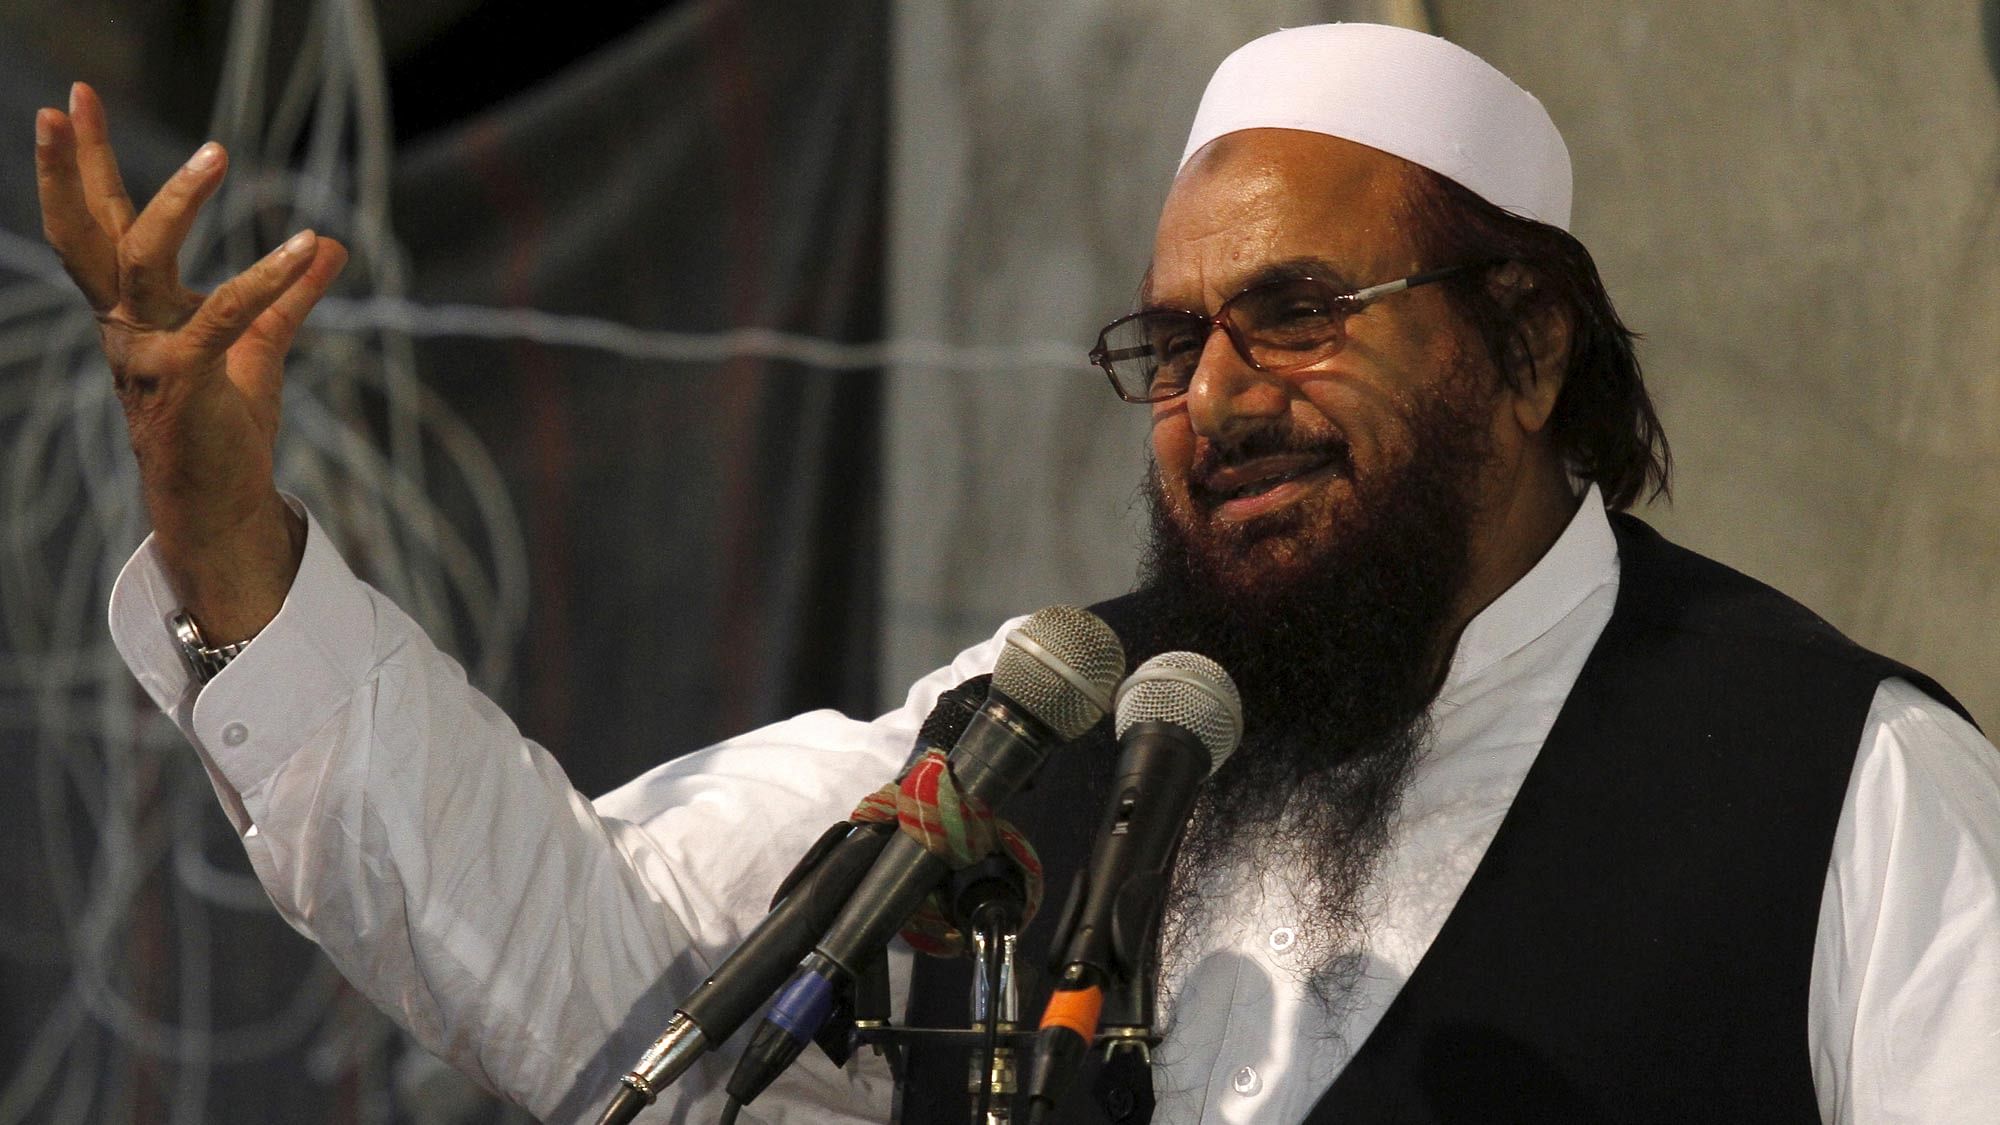 Hafiz Muhammad Saeed, Chief of the Jamat-ud-Dawa religious party, addresses the Harmain Sharifain Conference in support of the Saudi Arabian government in Peshawar April 2015. (Photo: Reuters)